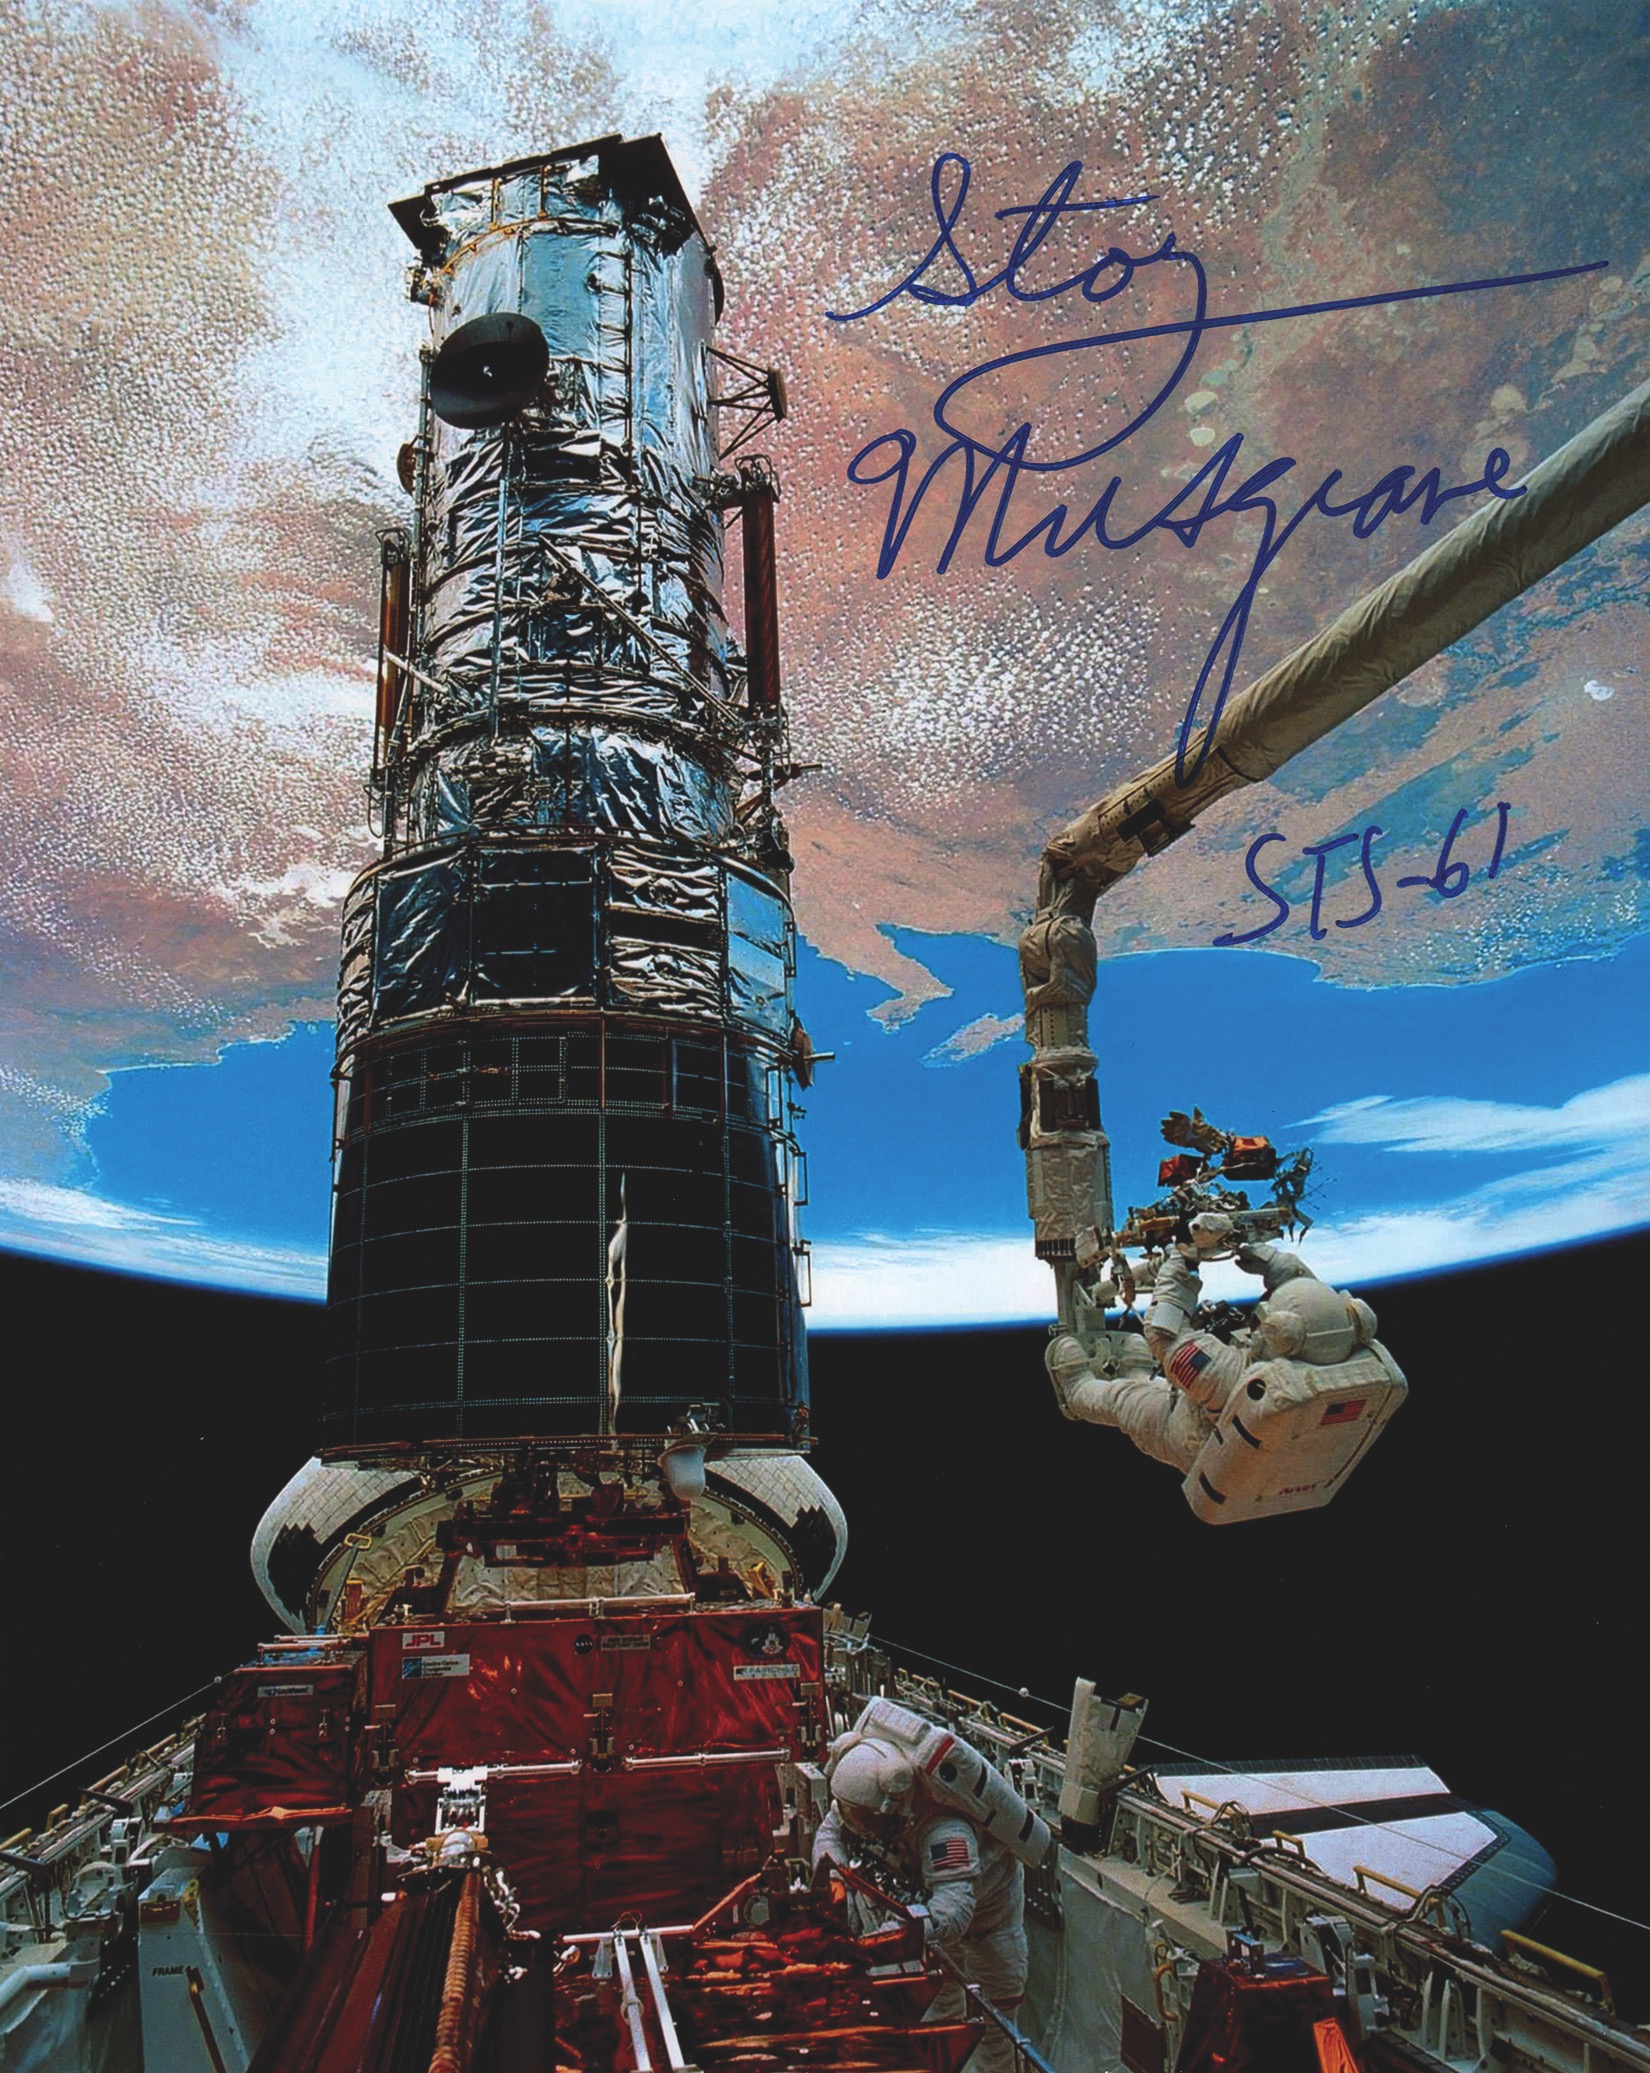 Lot #411 Story Musgrave (3) Signed Photographs - Image 1